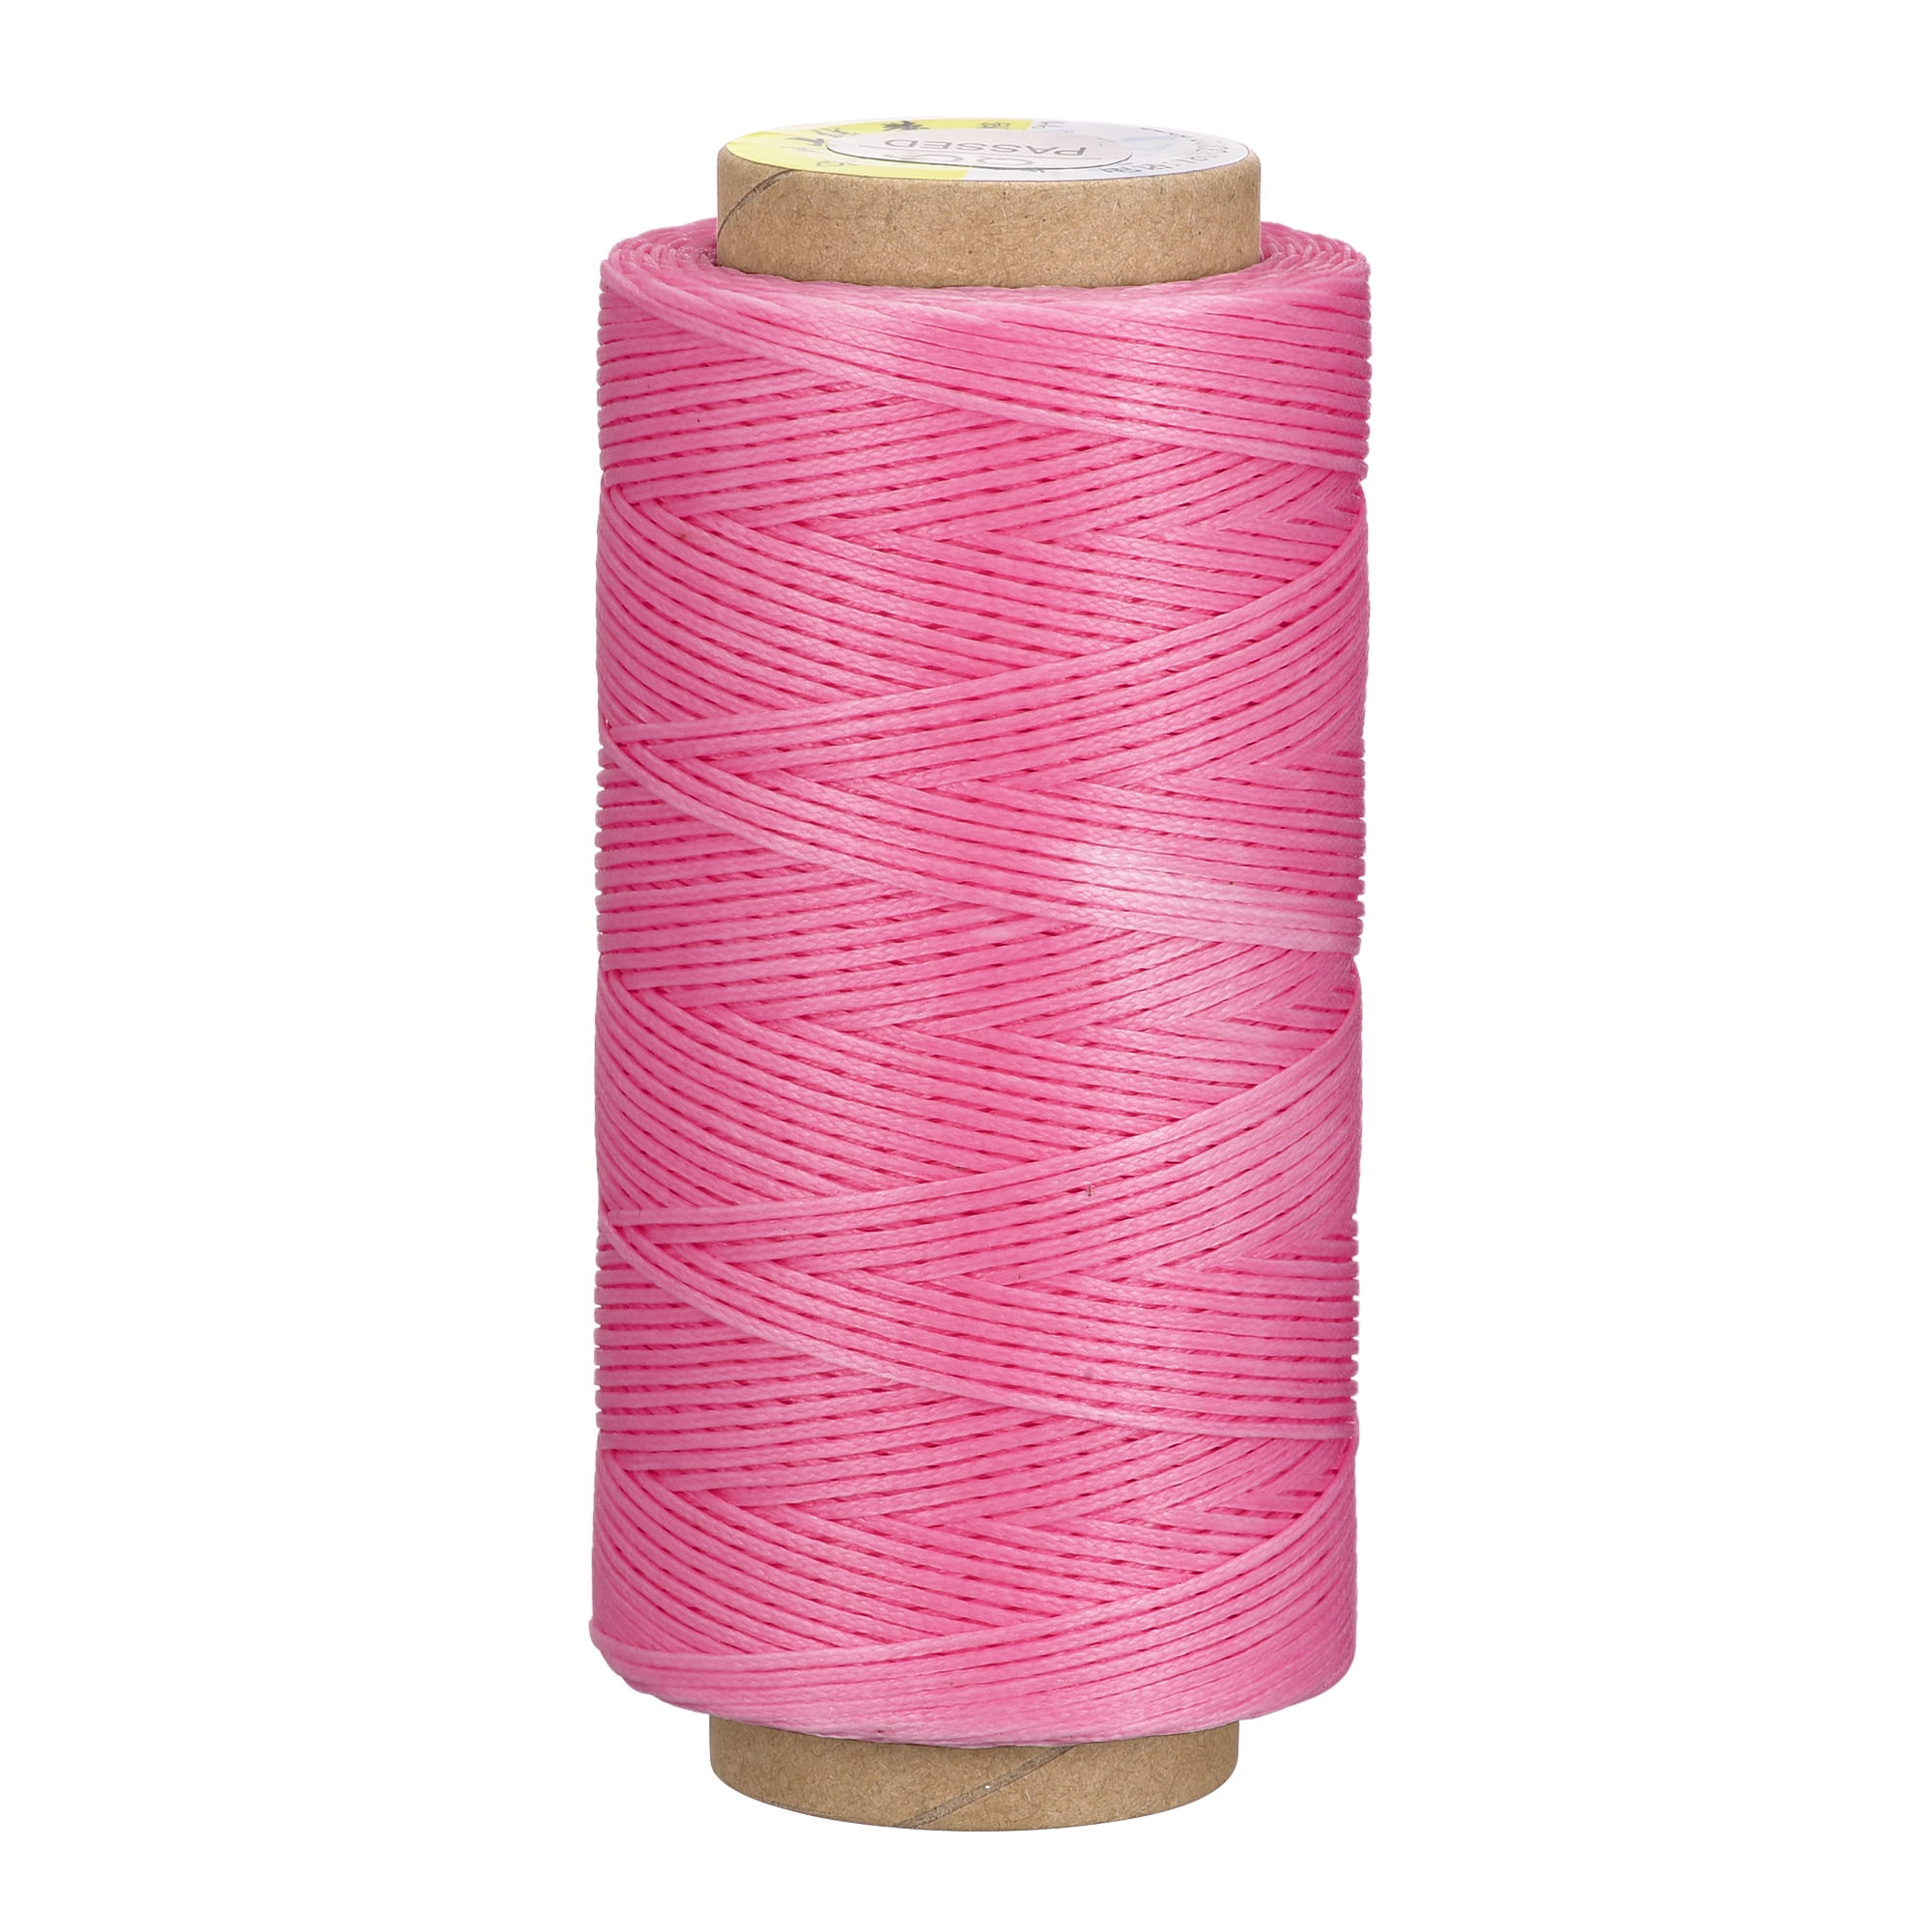 Janome, White Polyester Embroidery Thread (273 yards)